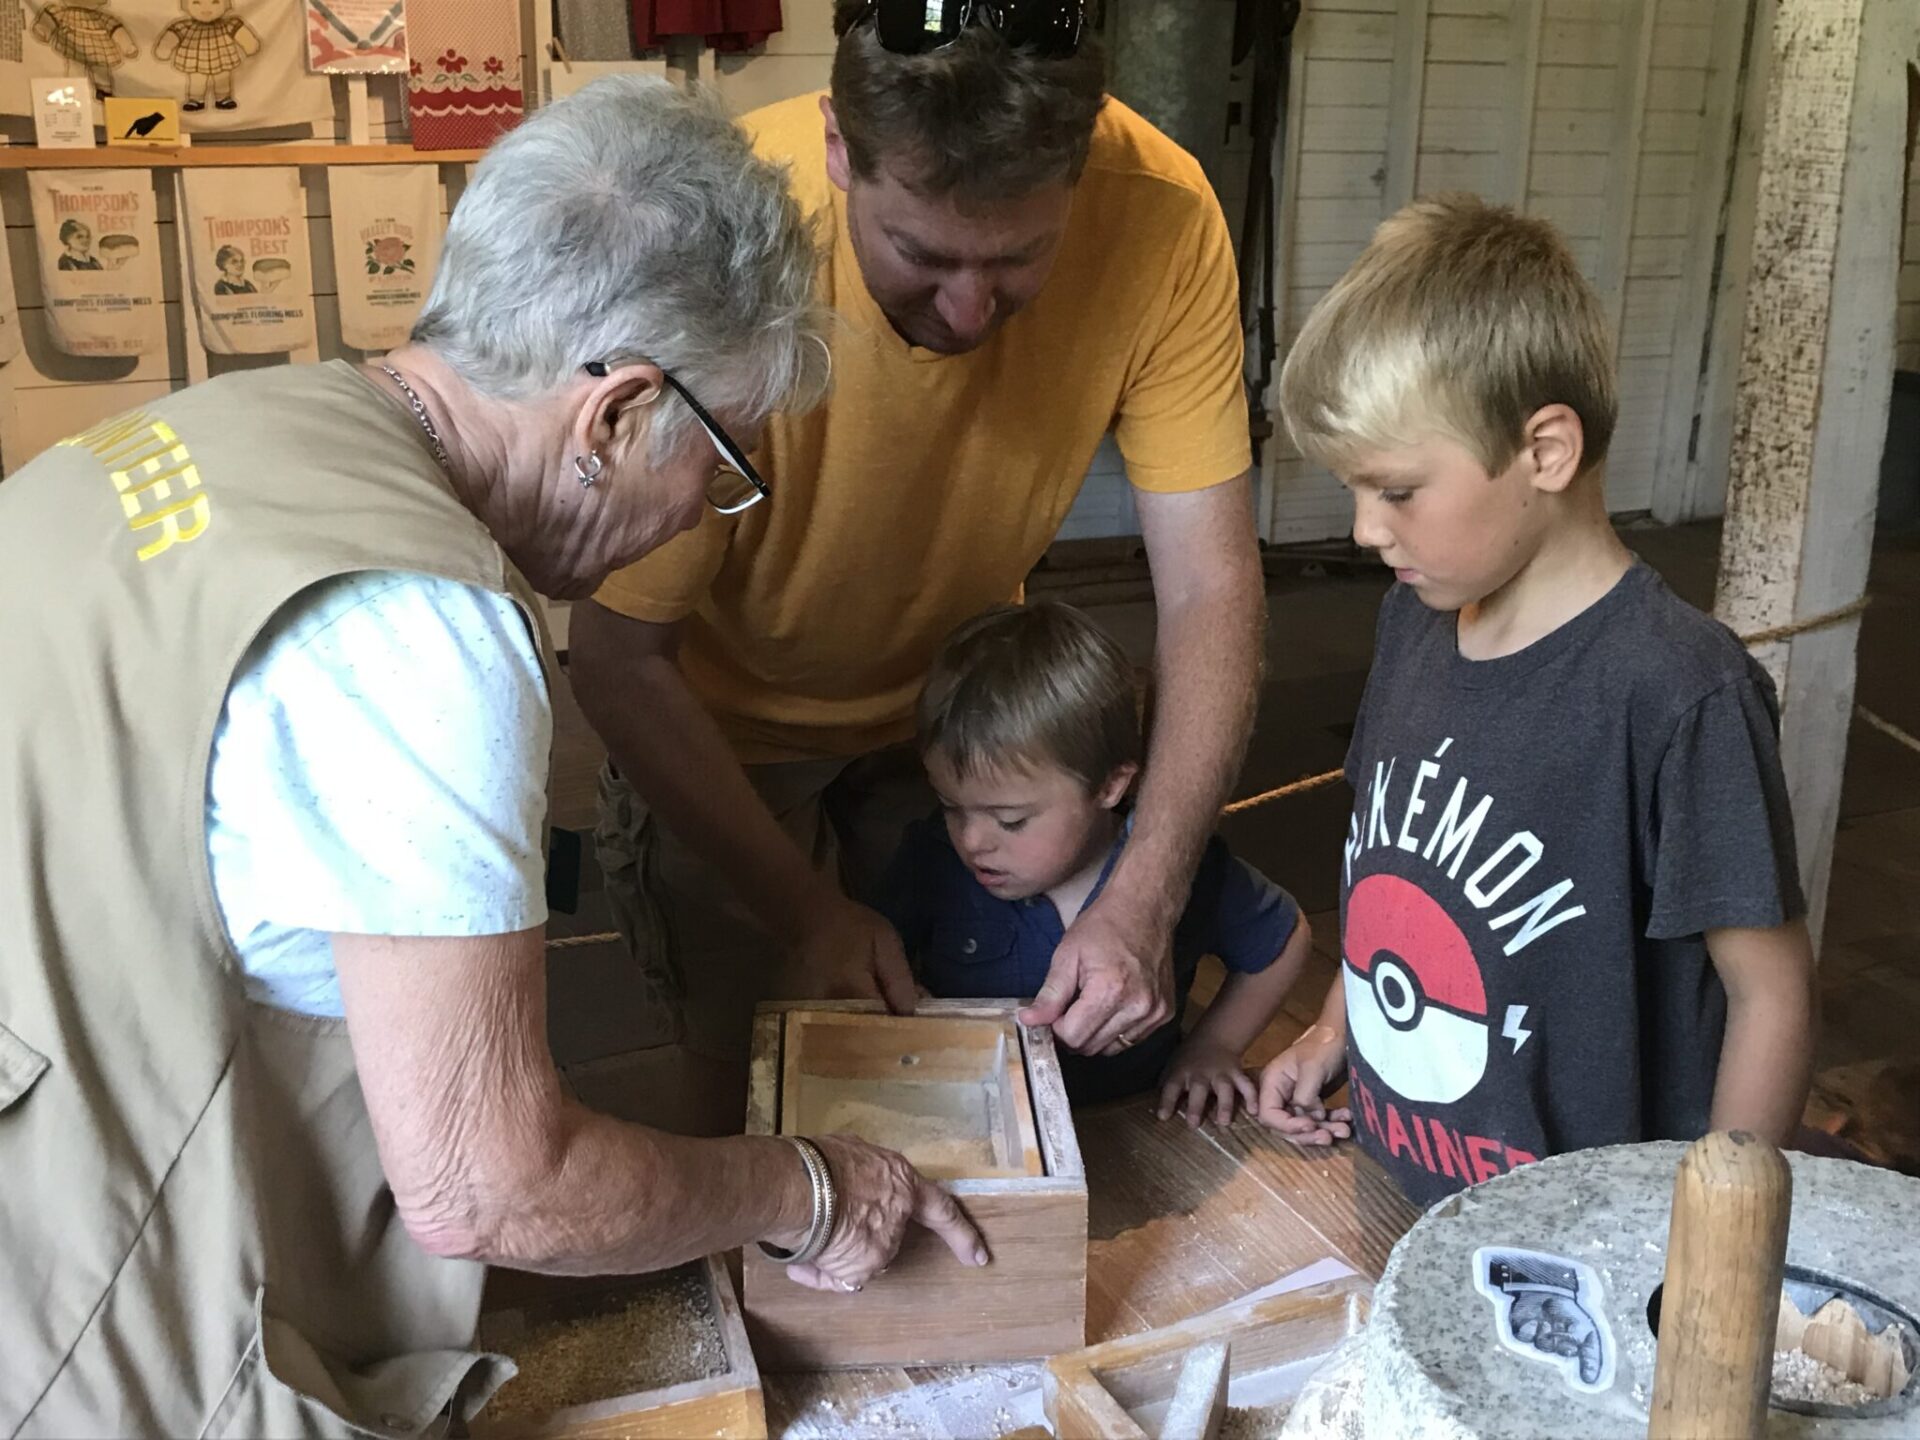 A museum volunteer shows children how to separate the parts of a grain from the fine flour.